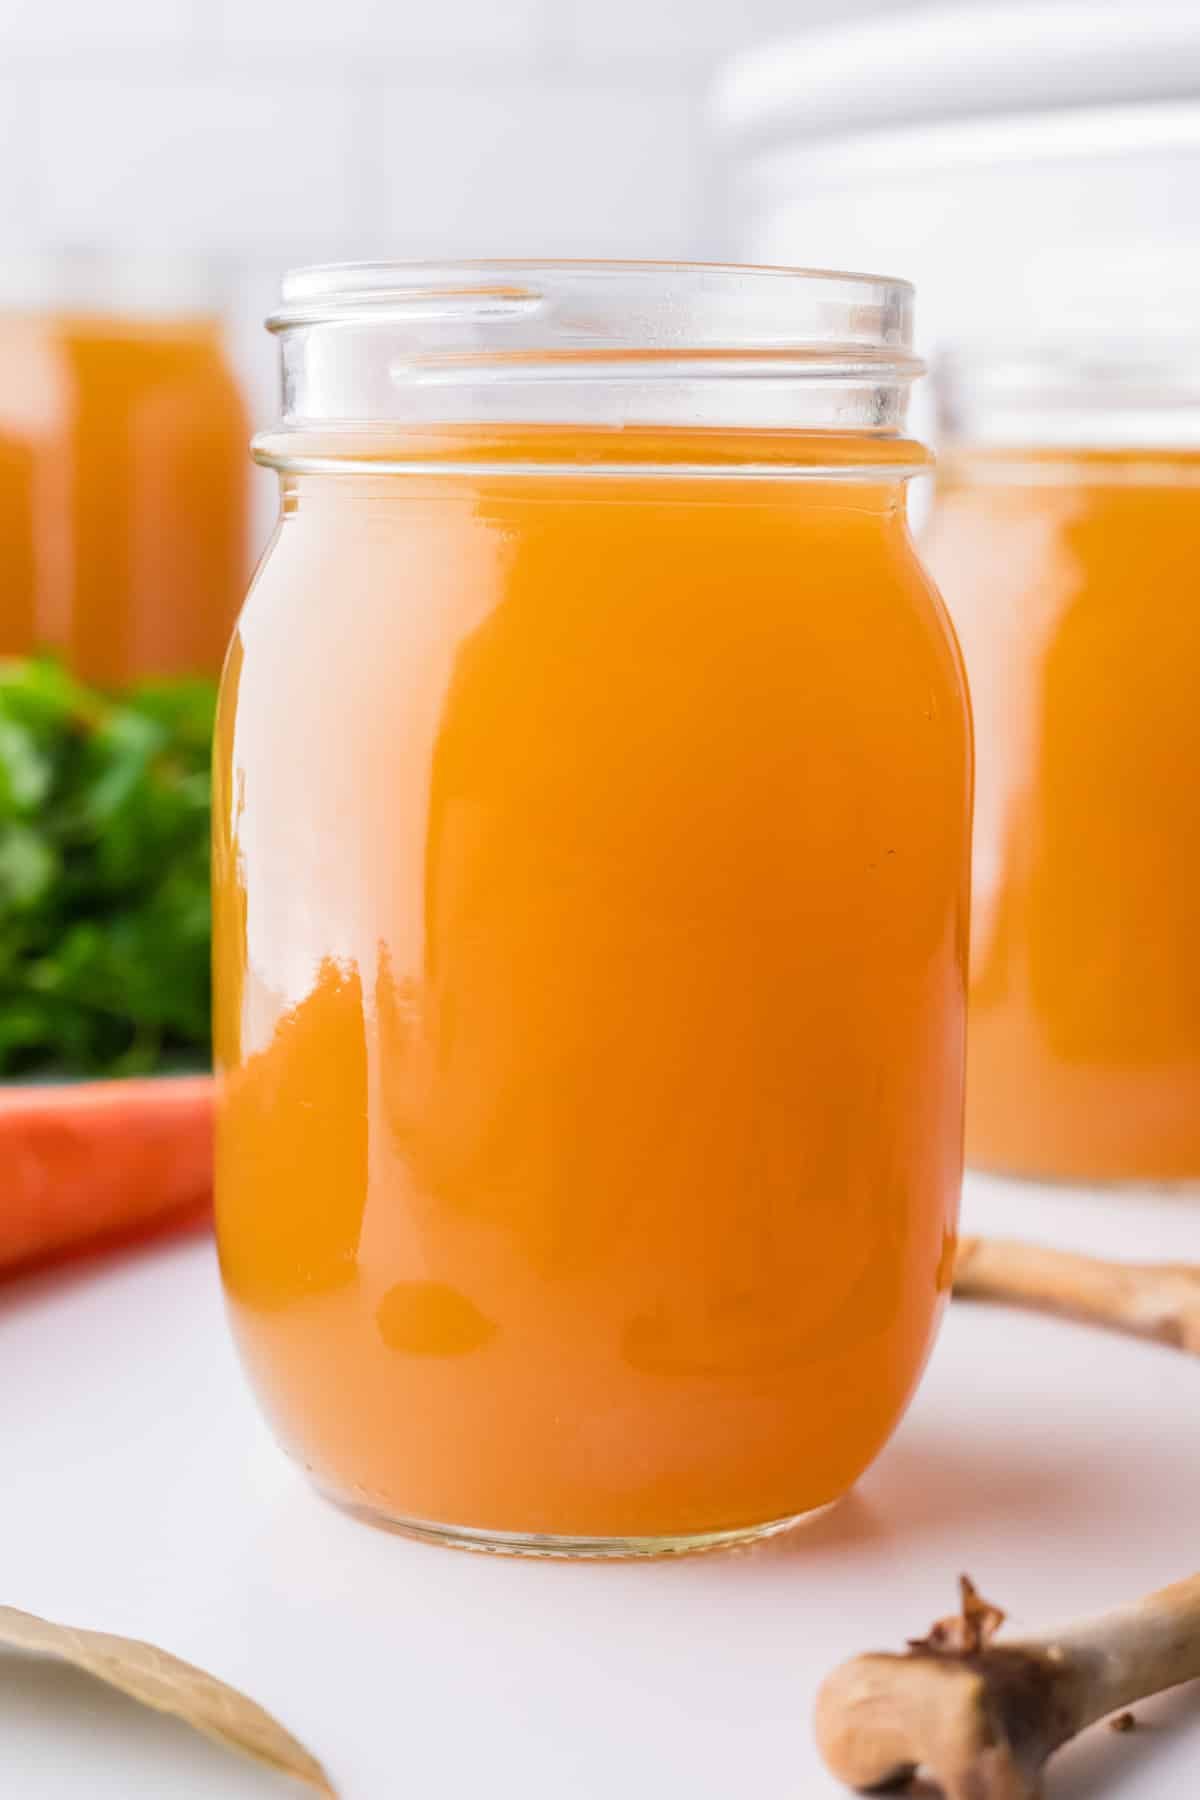 A glass canning jar filled with chicken broth.